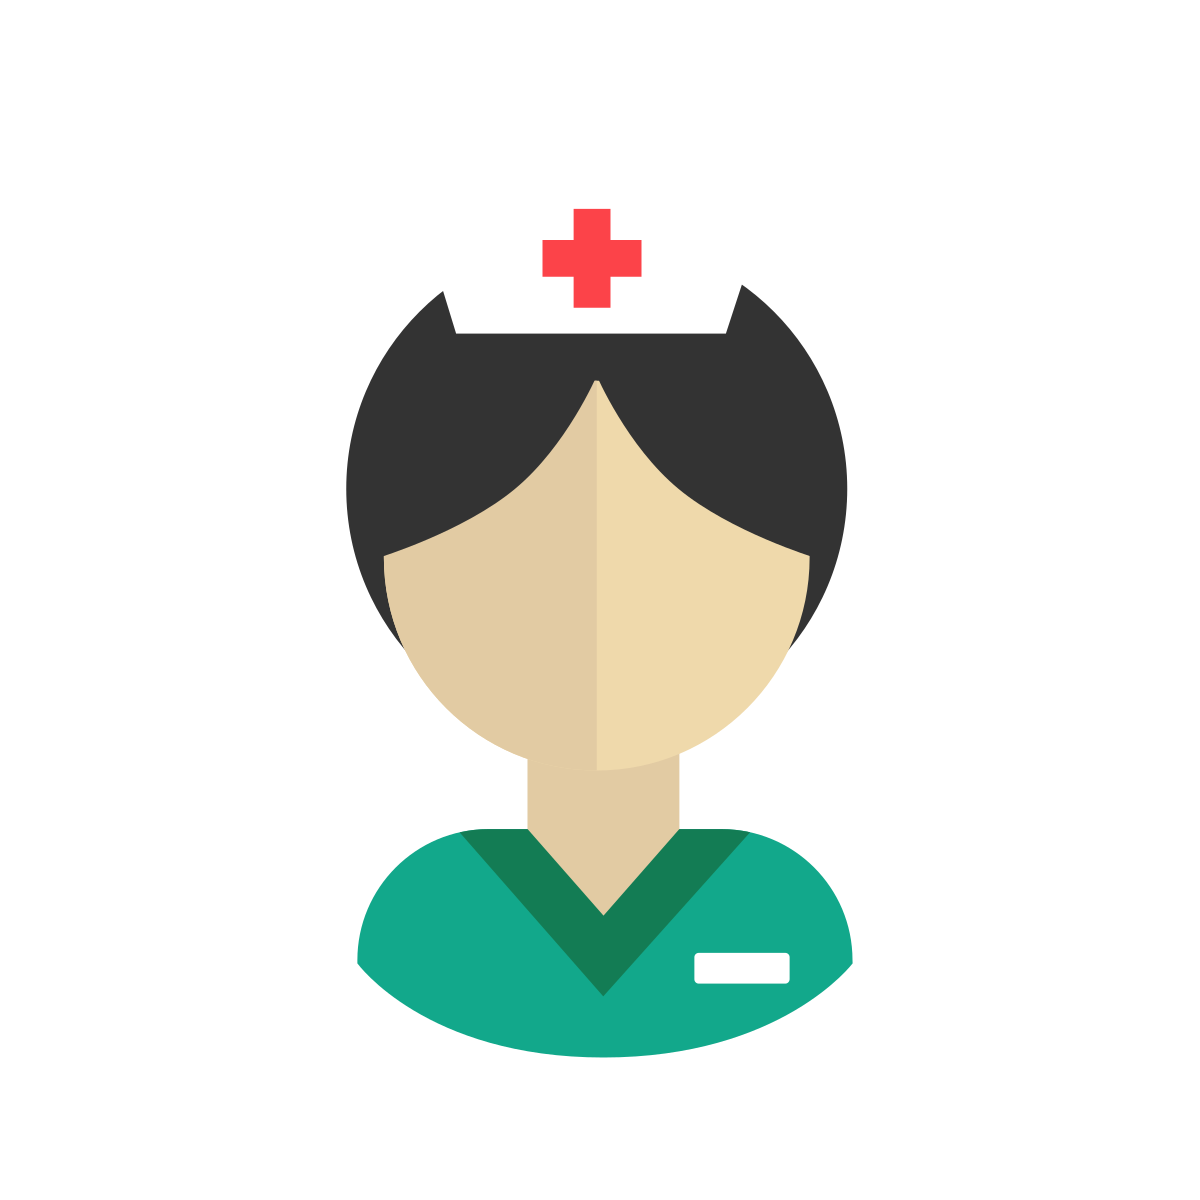 Download File:Female Medical Nurse Flat Icon Vector.svg - Wikimedia Commons